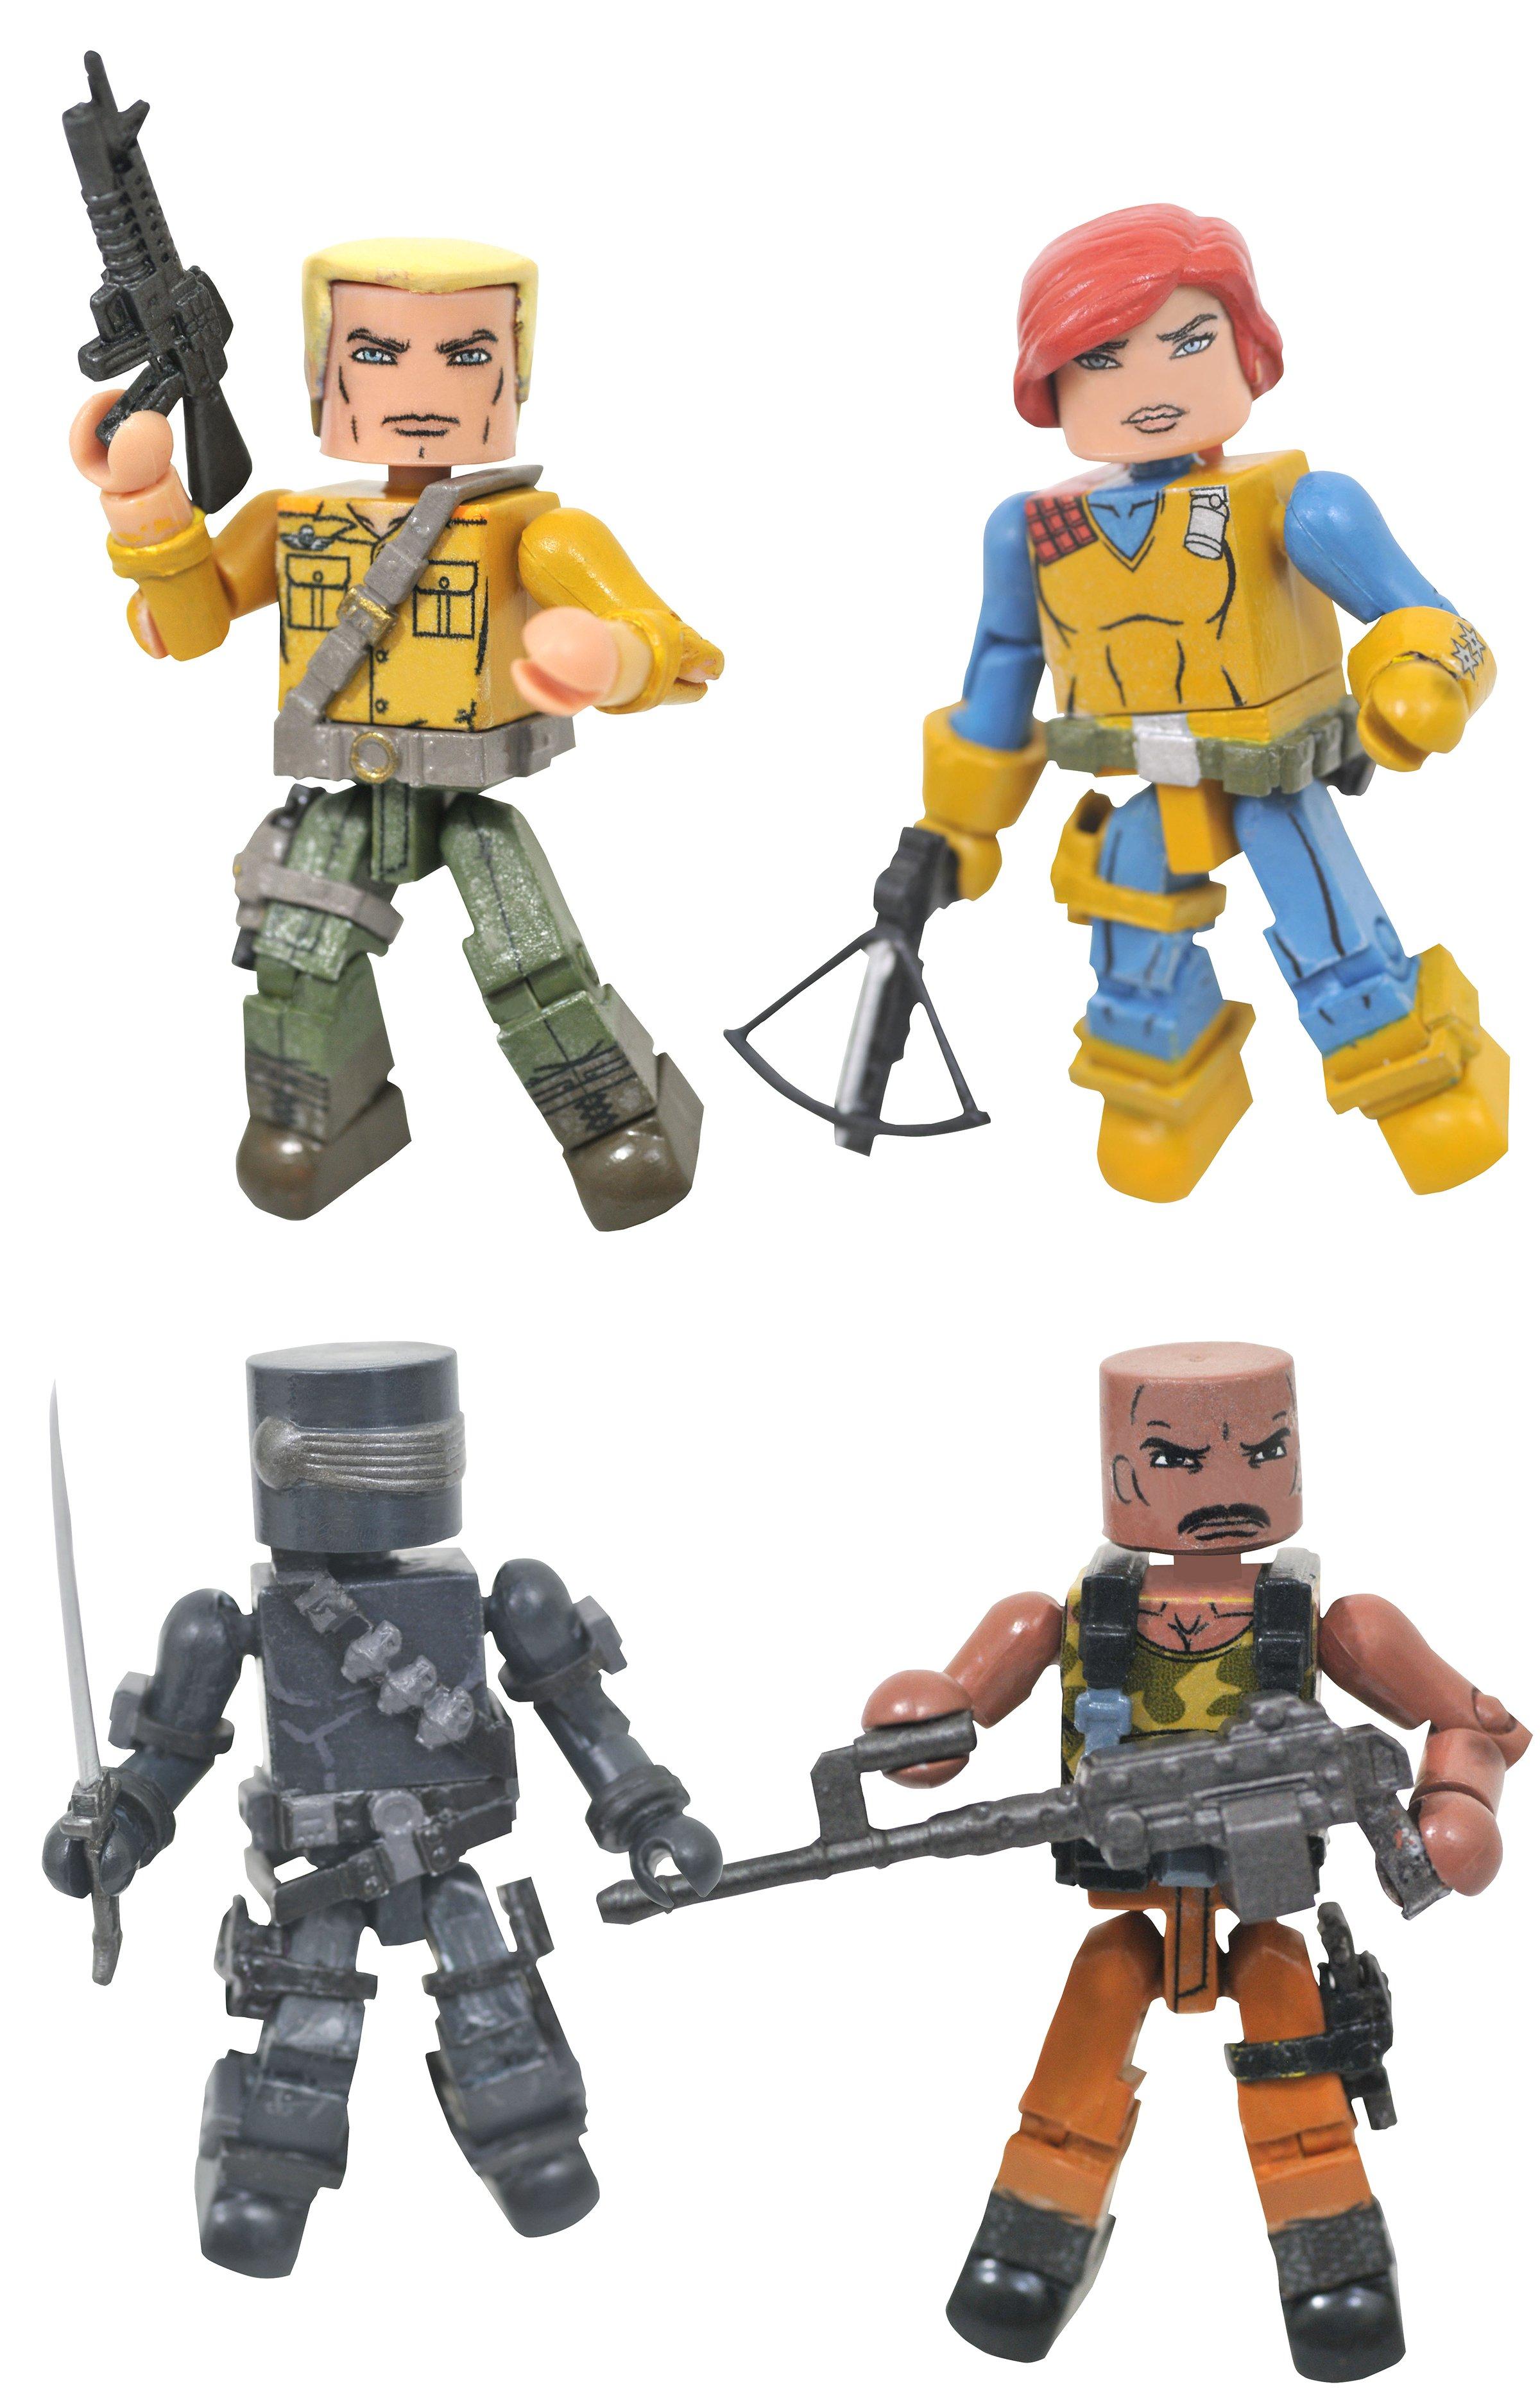 Diamond Select Toys G.I. Joe Minimates Series 1 Boxed Set of Two 2-in Action Figures (GameStop)